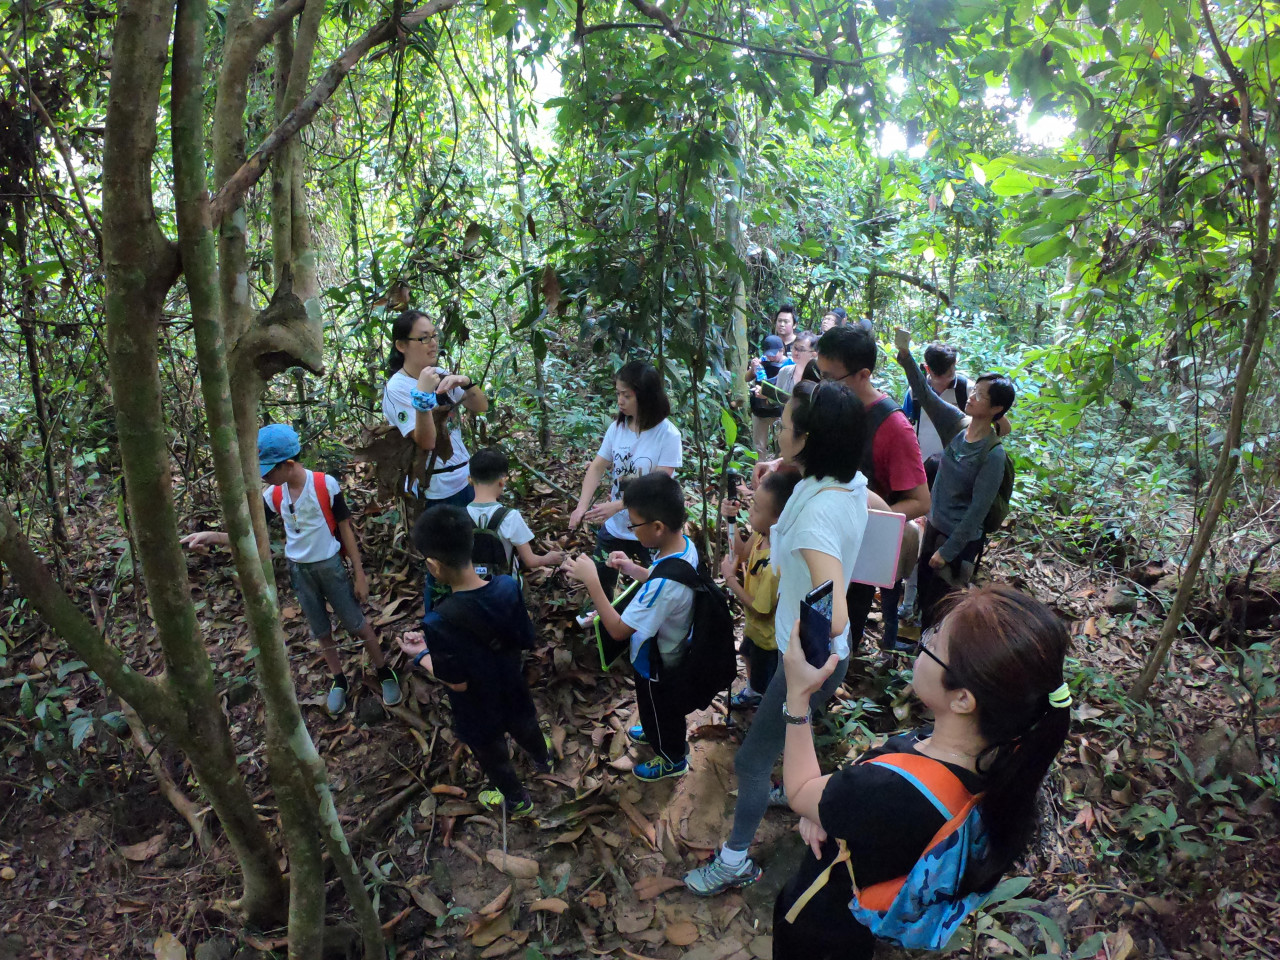 Yap stated that people are replacing the natural environment with an anthropogenic one by encroaching on wildlife habitats. – Pic courtesy of Langur Penang Project